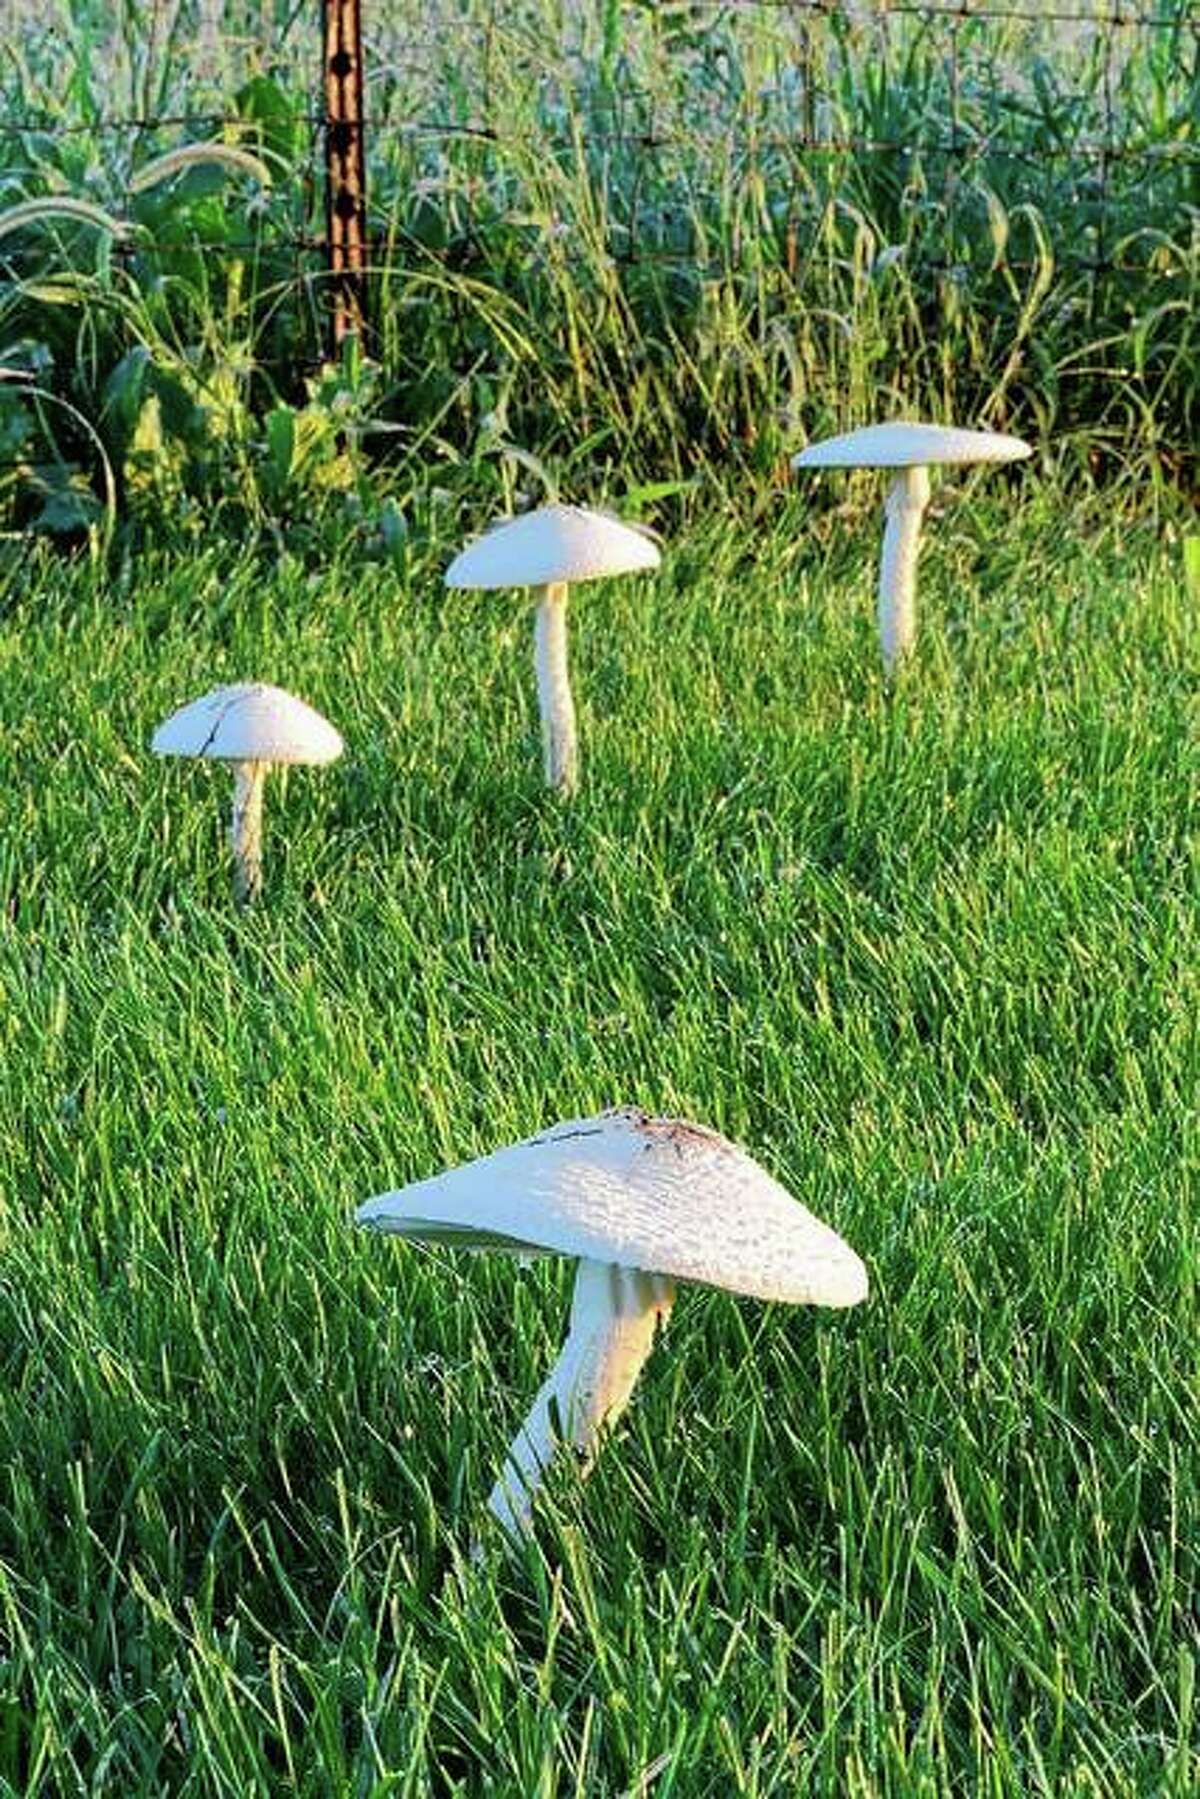 Toadstools pop up in an orderly fashion in a pasture.